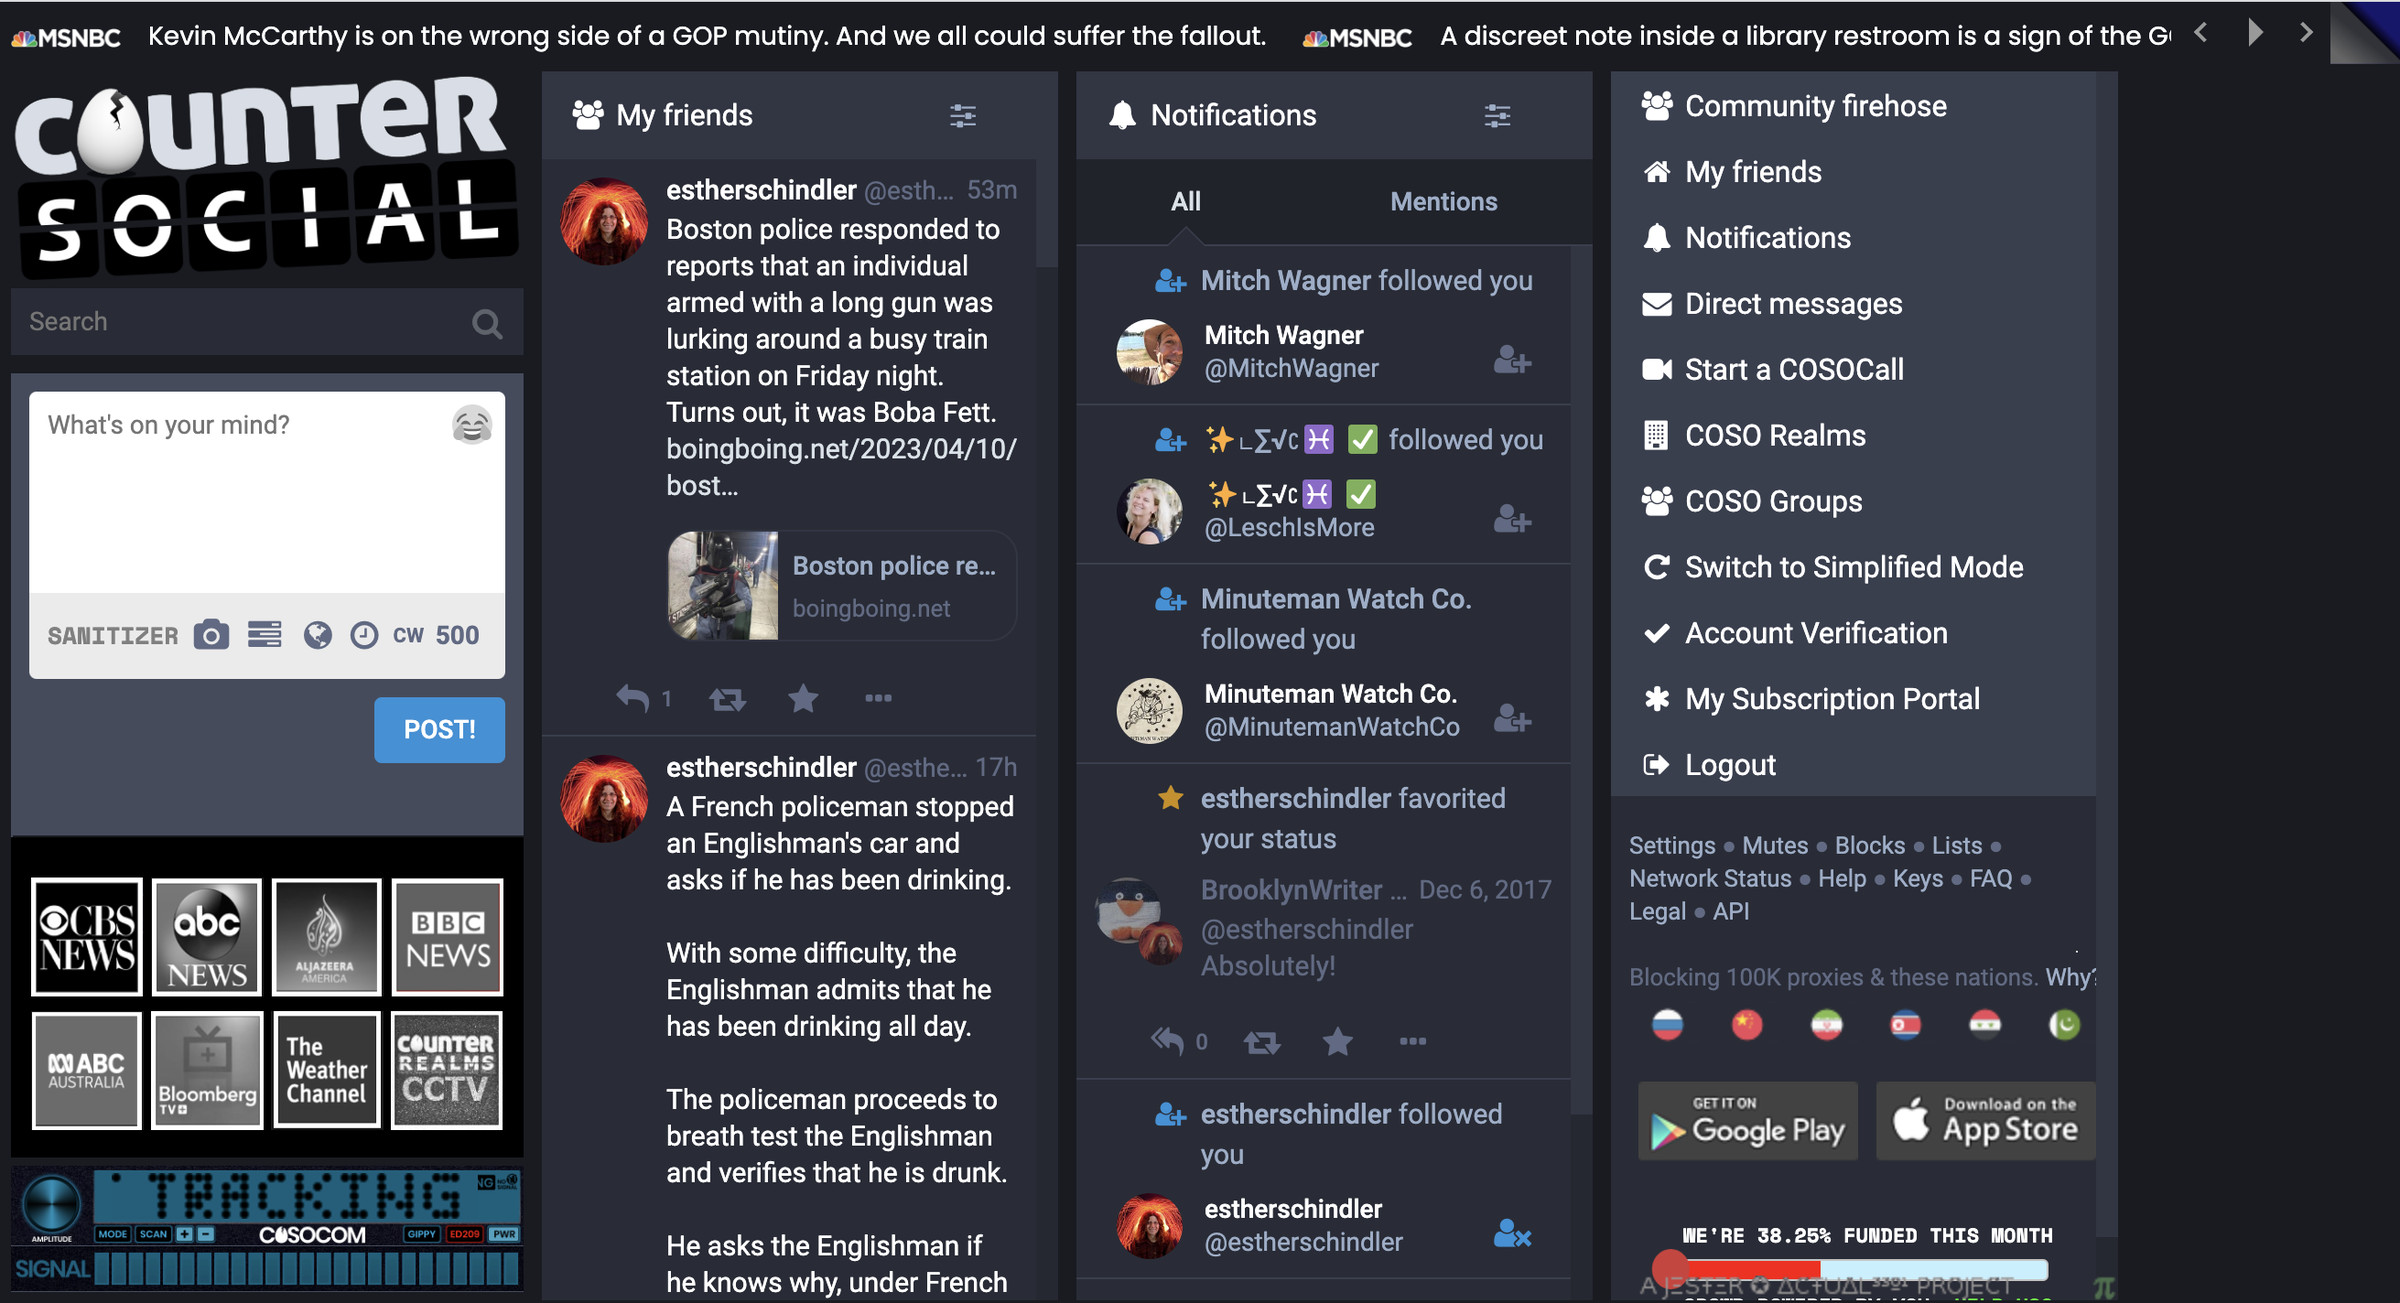 CounterSocial main page, with a place to type posts on the left, over buttons for various media feeds, two columns of text labeled My Friends, Notifications, and a list of topics and features such as Community firehose and Notifications.